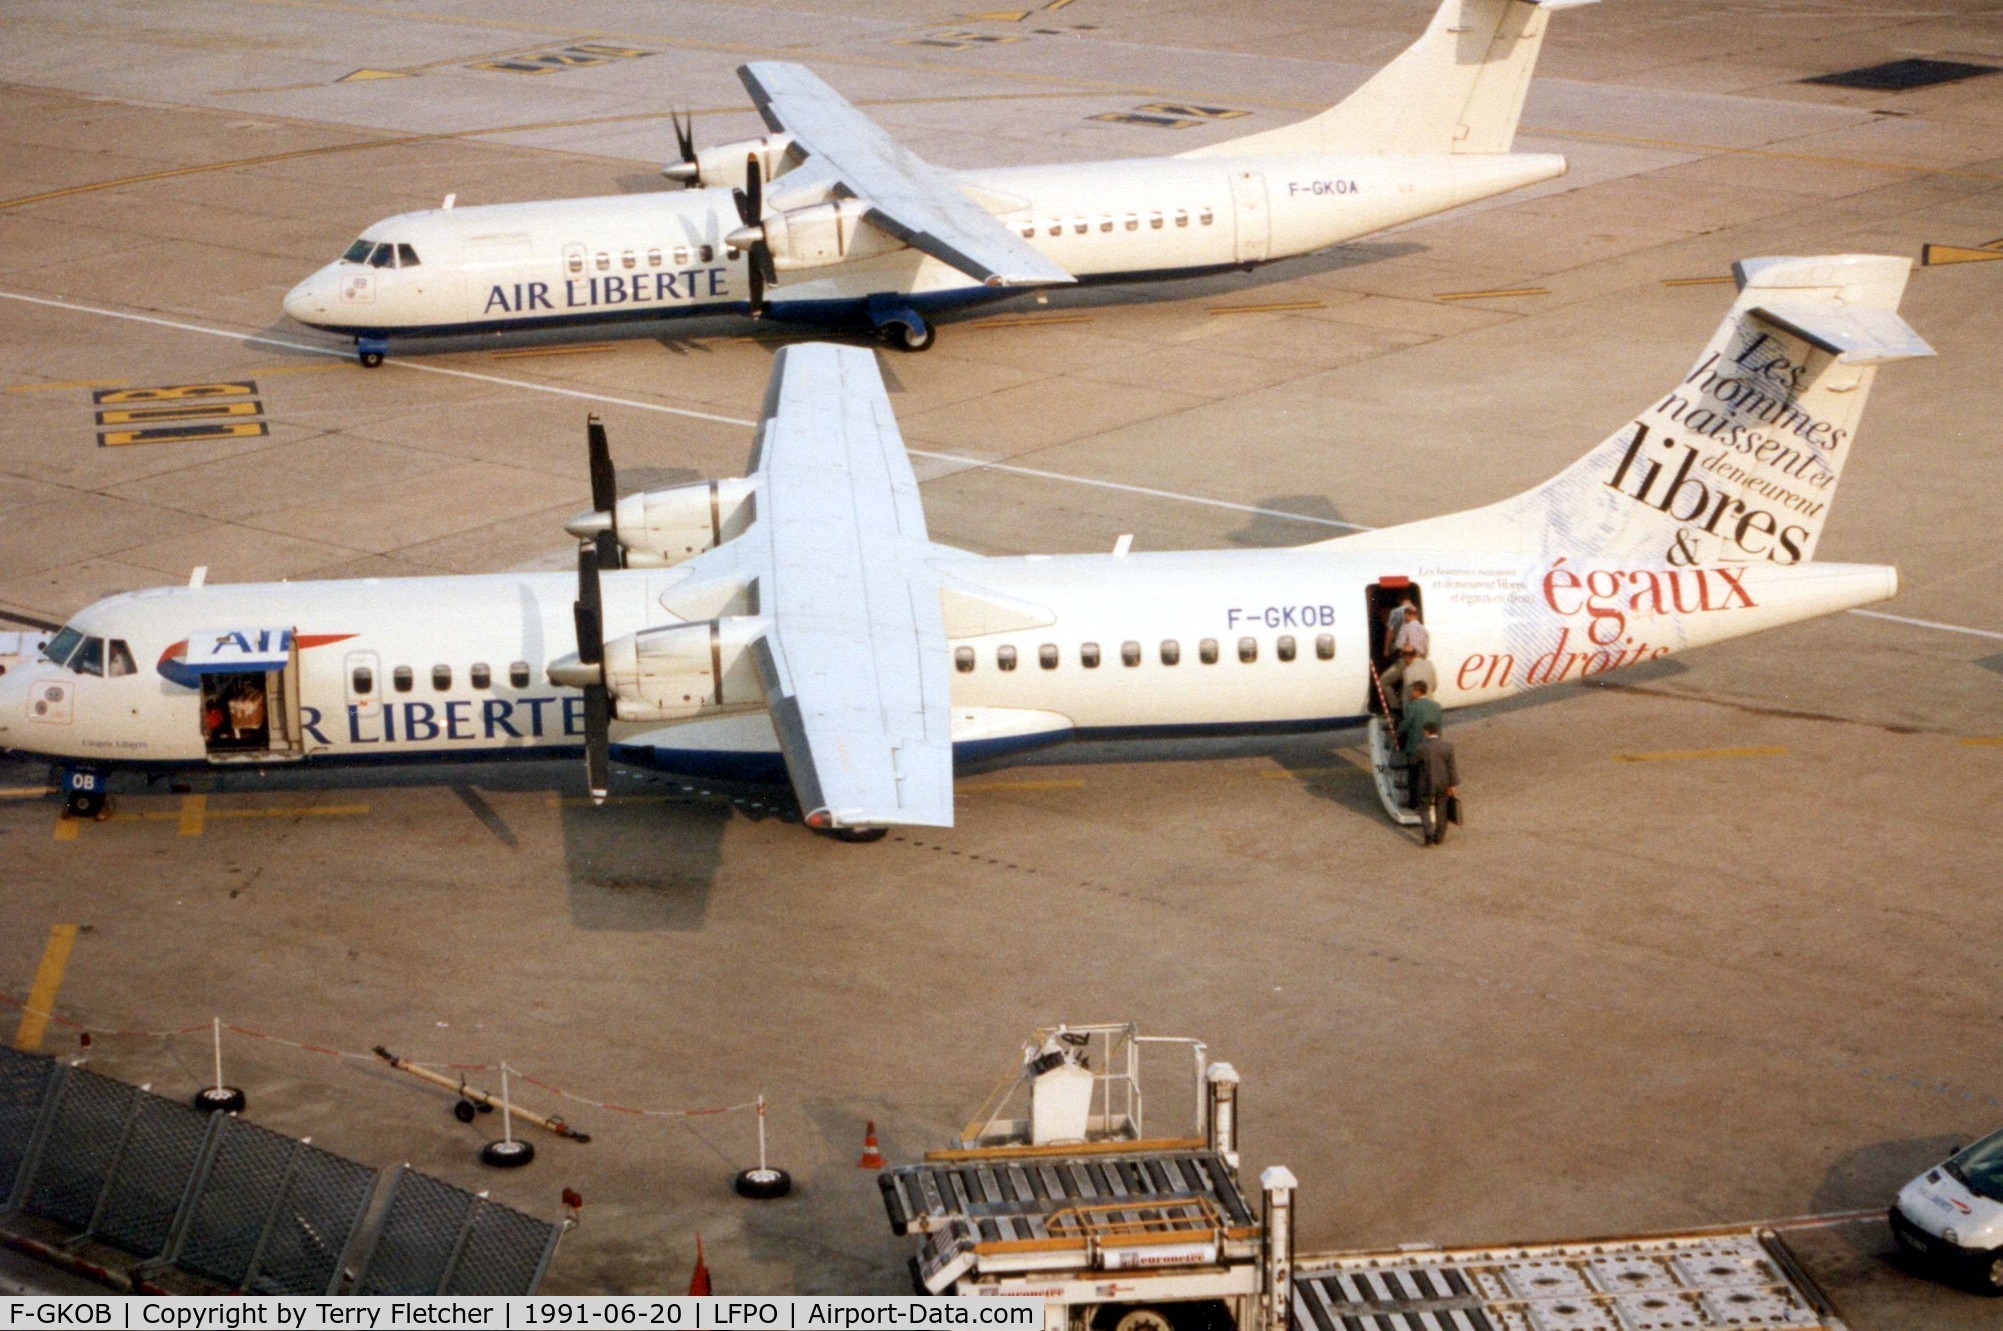 F-GKOB, 1991 ATR 72-202 C/N 232, ATR72 operating for Air Libertie in 1991 became HB-AFK with Farnair